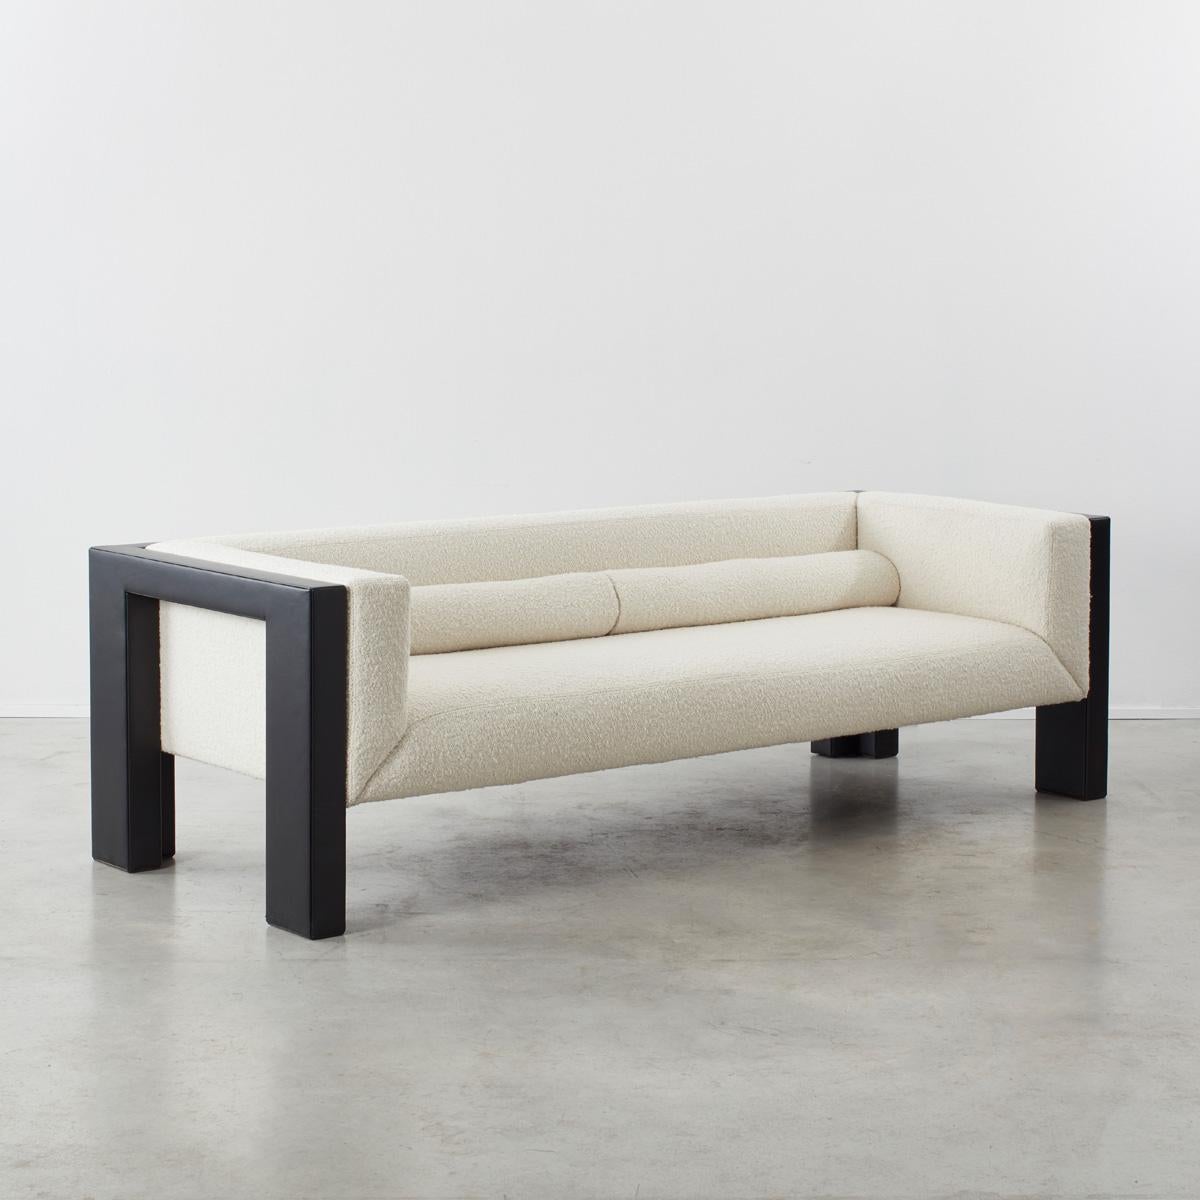 Paolo Piva (1950-2017) was an Italian architect and designer whose interest in social housing influenced a career in making minimalist, elegant and functional buildings and furniture. This is particularly so for the DS-4251 / 53 sofa, designed for